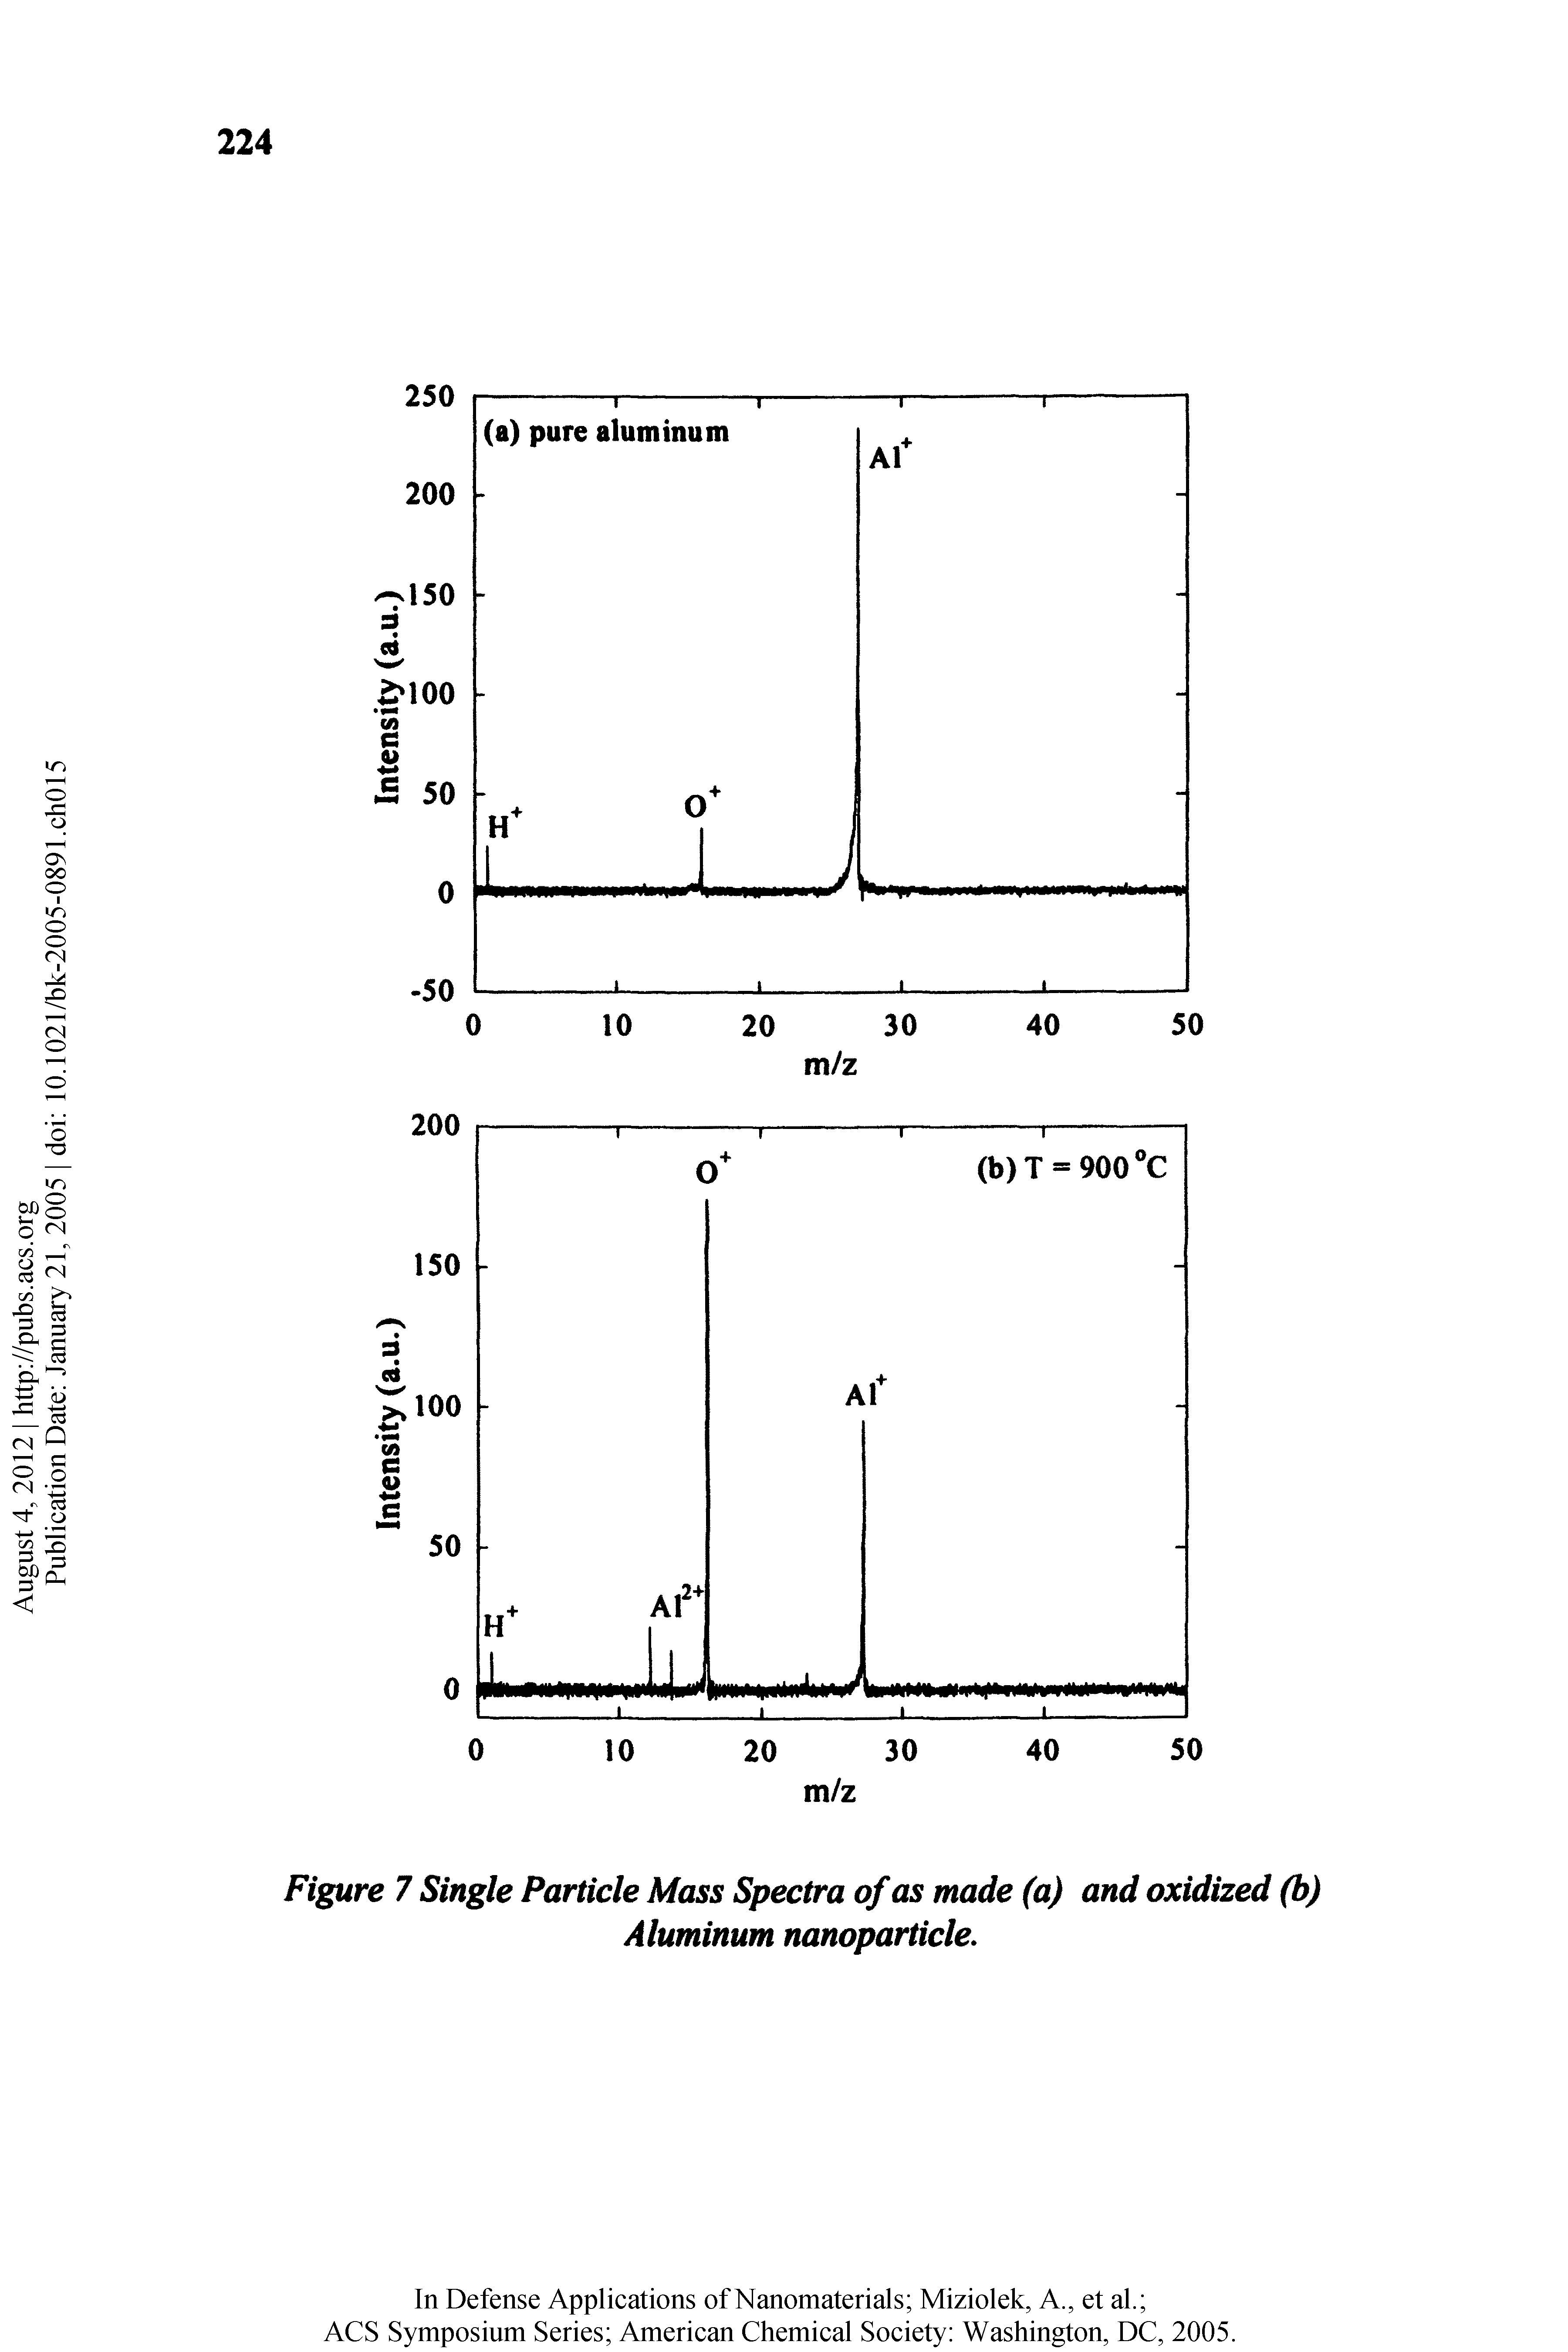 Figure 7 Single Particle Mass Spectra of as made (a) and oxidized (b) Aluminum nanoparticle.